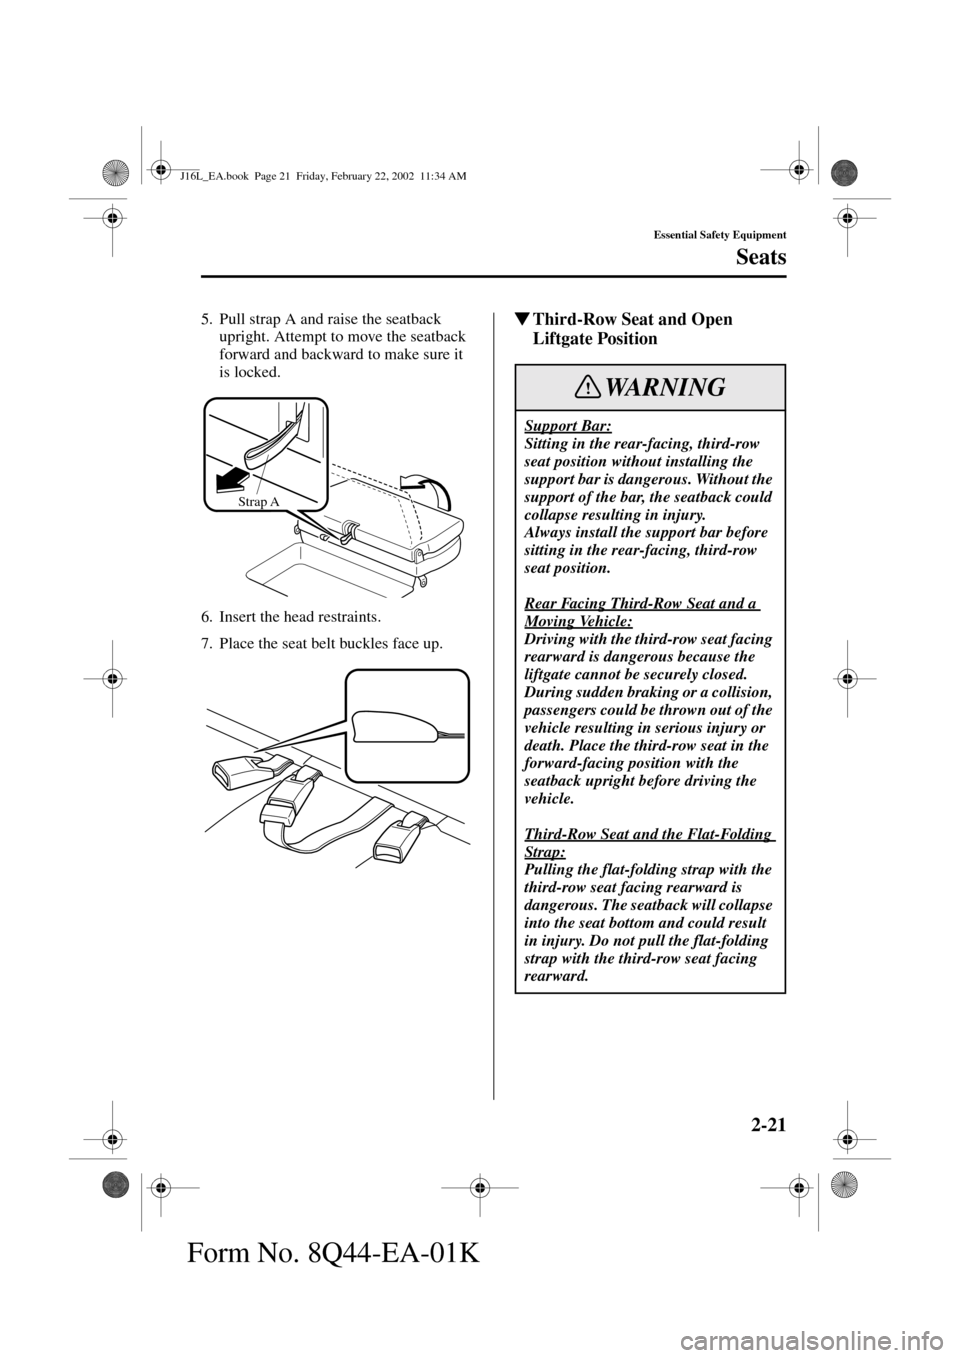 MAZDA MODEL MPV 2002   (in English) Owners Manual 2-21
Essential Safety Equipment
Seats
Form No. 8Q44-EA-01K
5. Pull strap A and raise the seatback 
upright. Attempt to move the seatback 
forward and backward to make sure it 
is locked.
6. Insert the